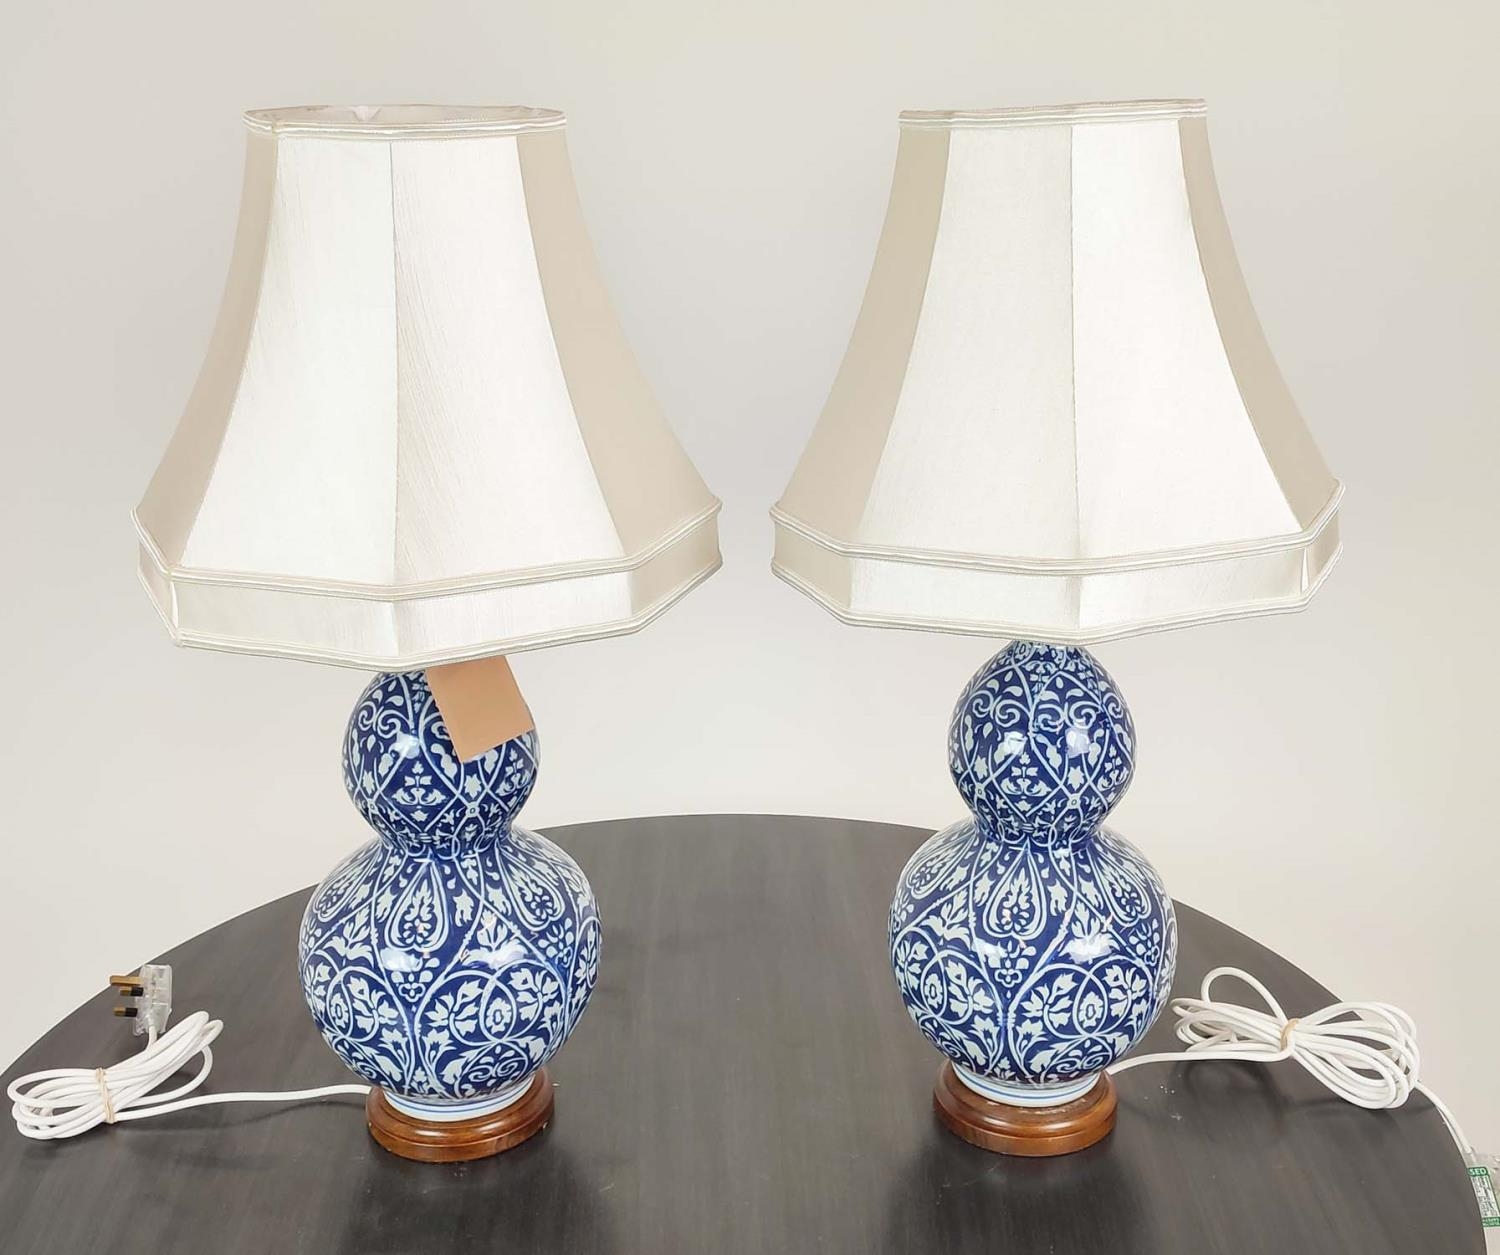 LAUREN RALPH LAUREN HOME TABLE LAMPS, a pair, blue and white double gourd ceramic, with shades, 72cm